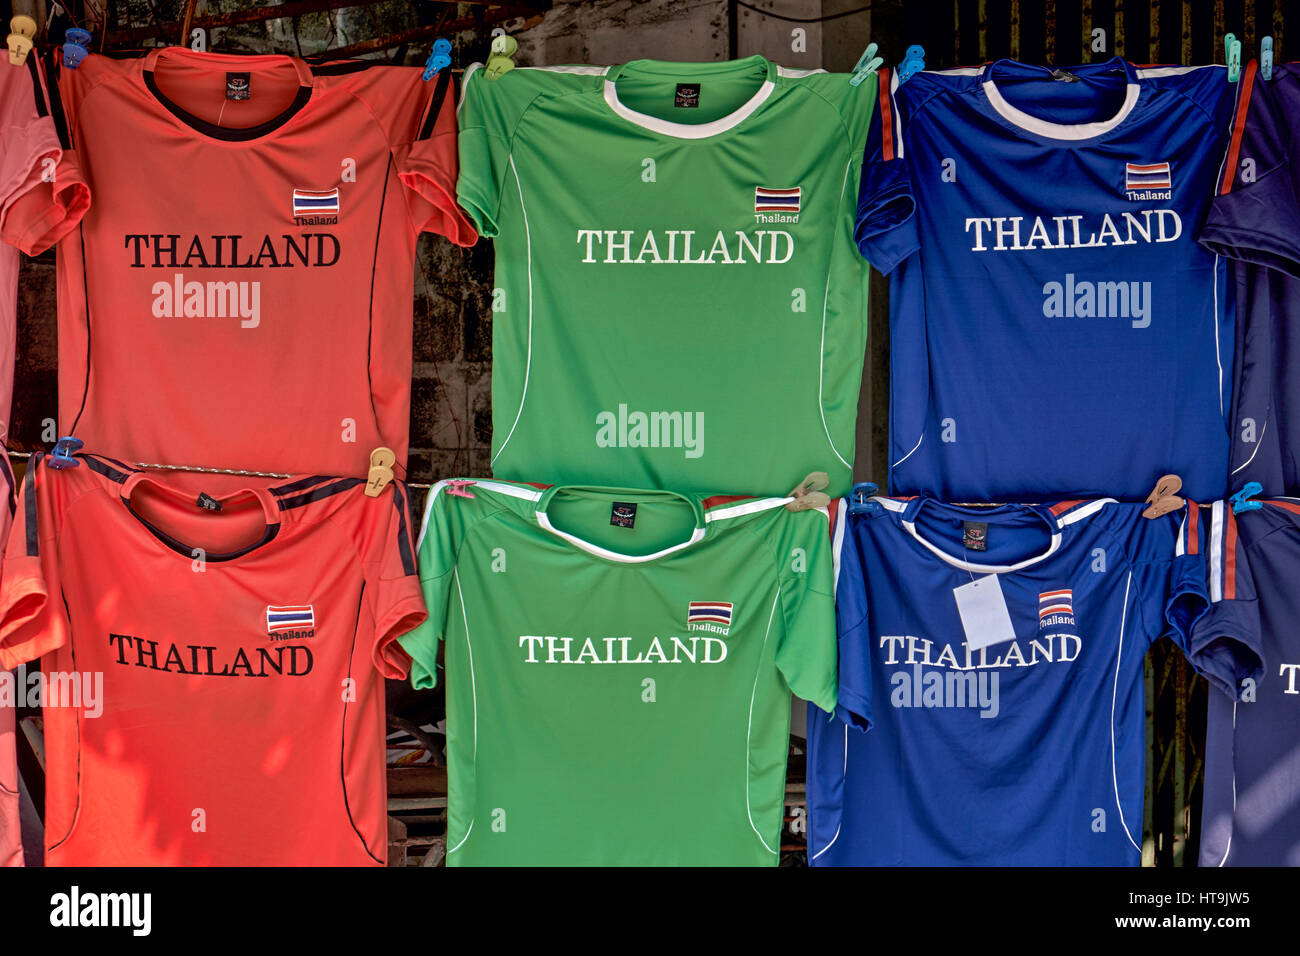 Football shirts for sale featuring the Thailand logo. Football shirt hanging. Stock Photo